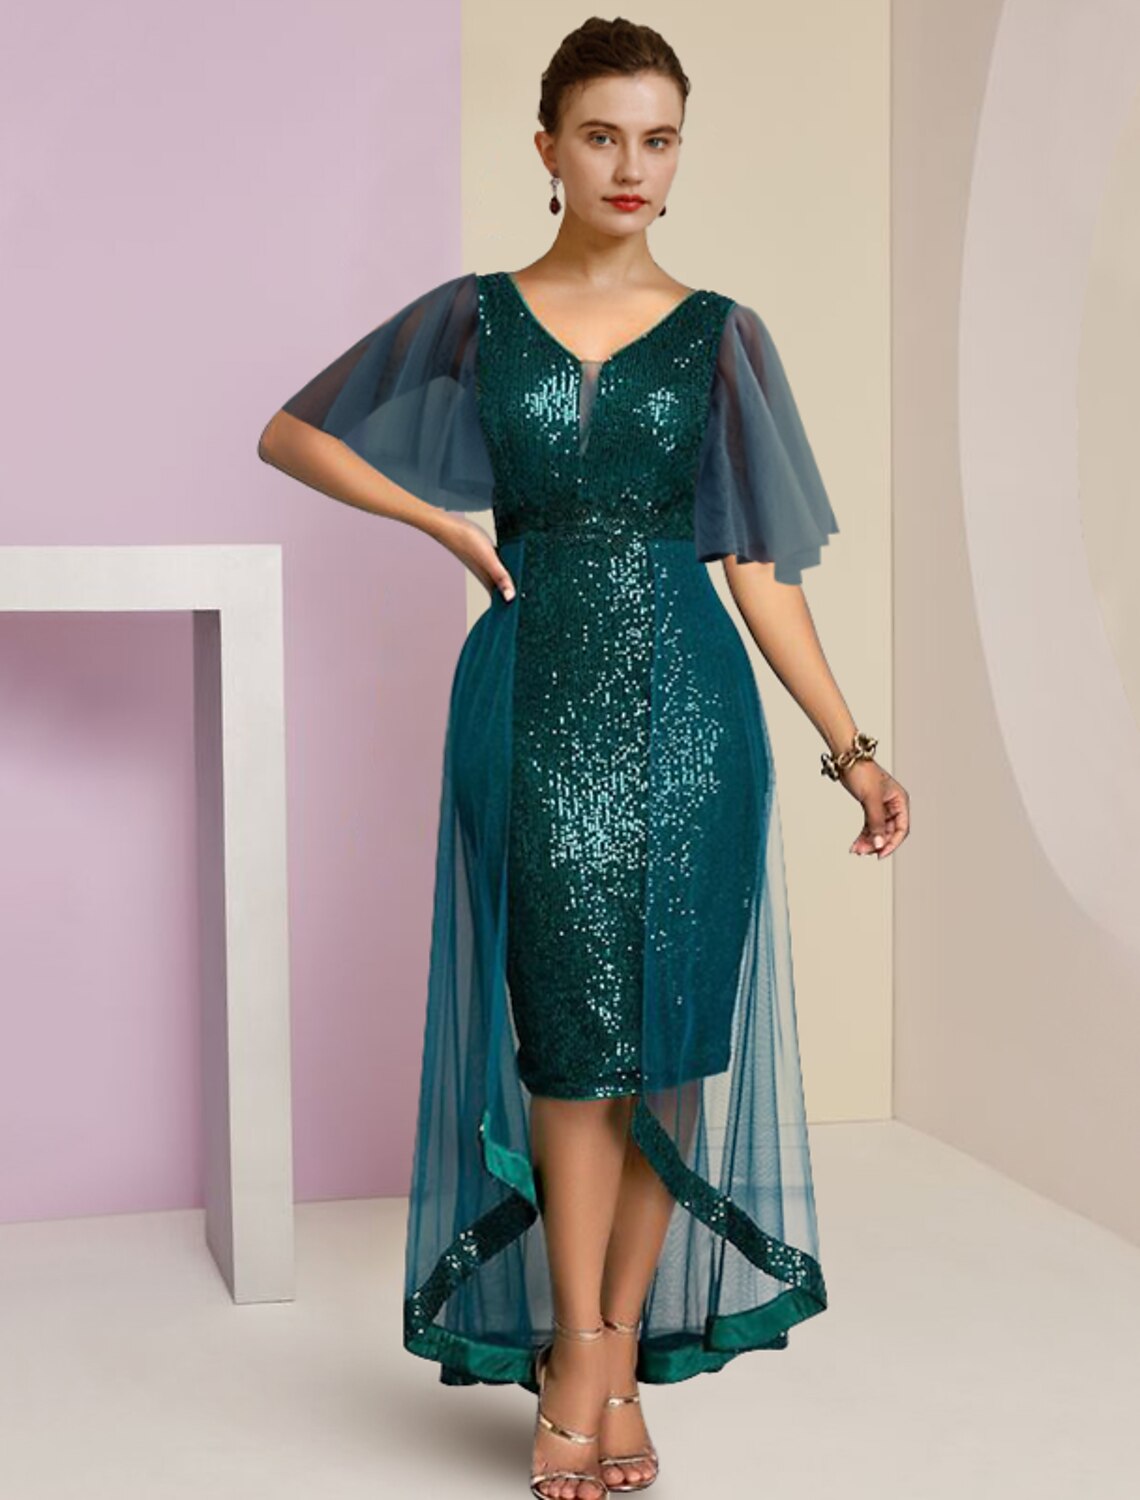 Sheath / Column Mother of the Bride Dress Formal Wedding Guest Elegant Sparkle & Shine High Low V Neck Knee Length Chiffon Sequined Short Sleeve with Pleats